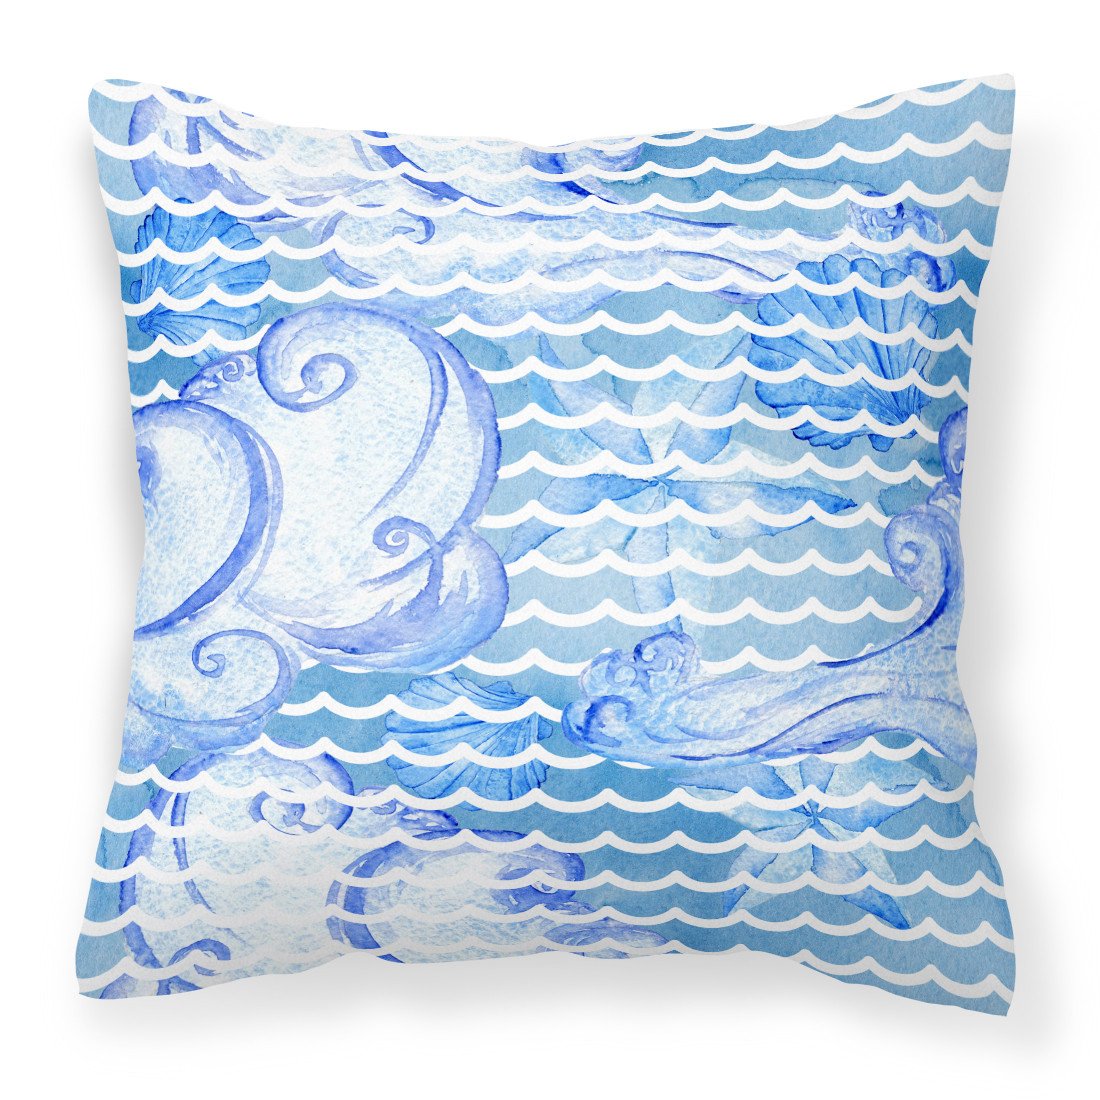 Beach Watercolor Abstract Waves Fabric Decorative Pillow BB7530PW1818 by Caroline's Treasures